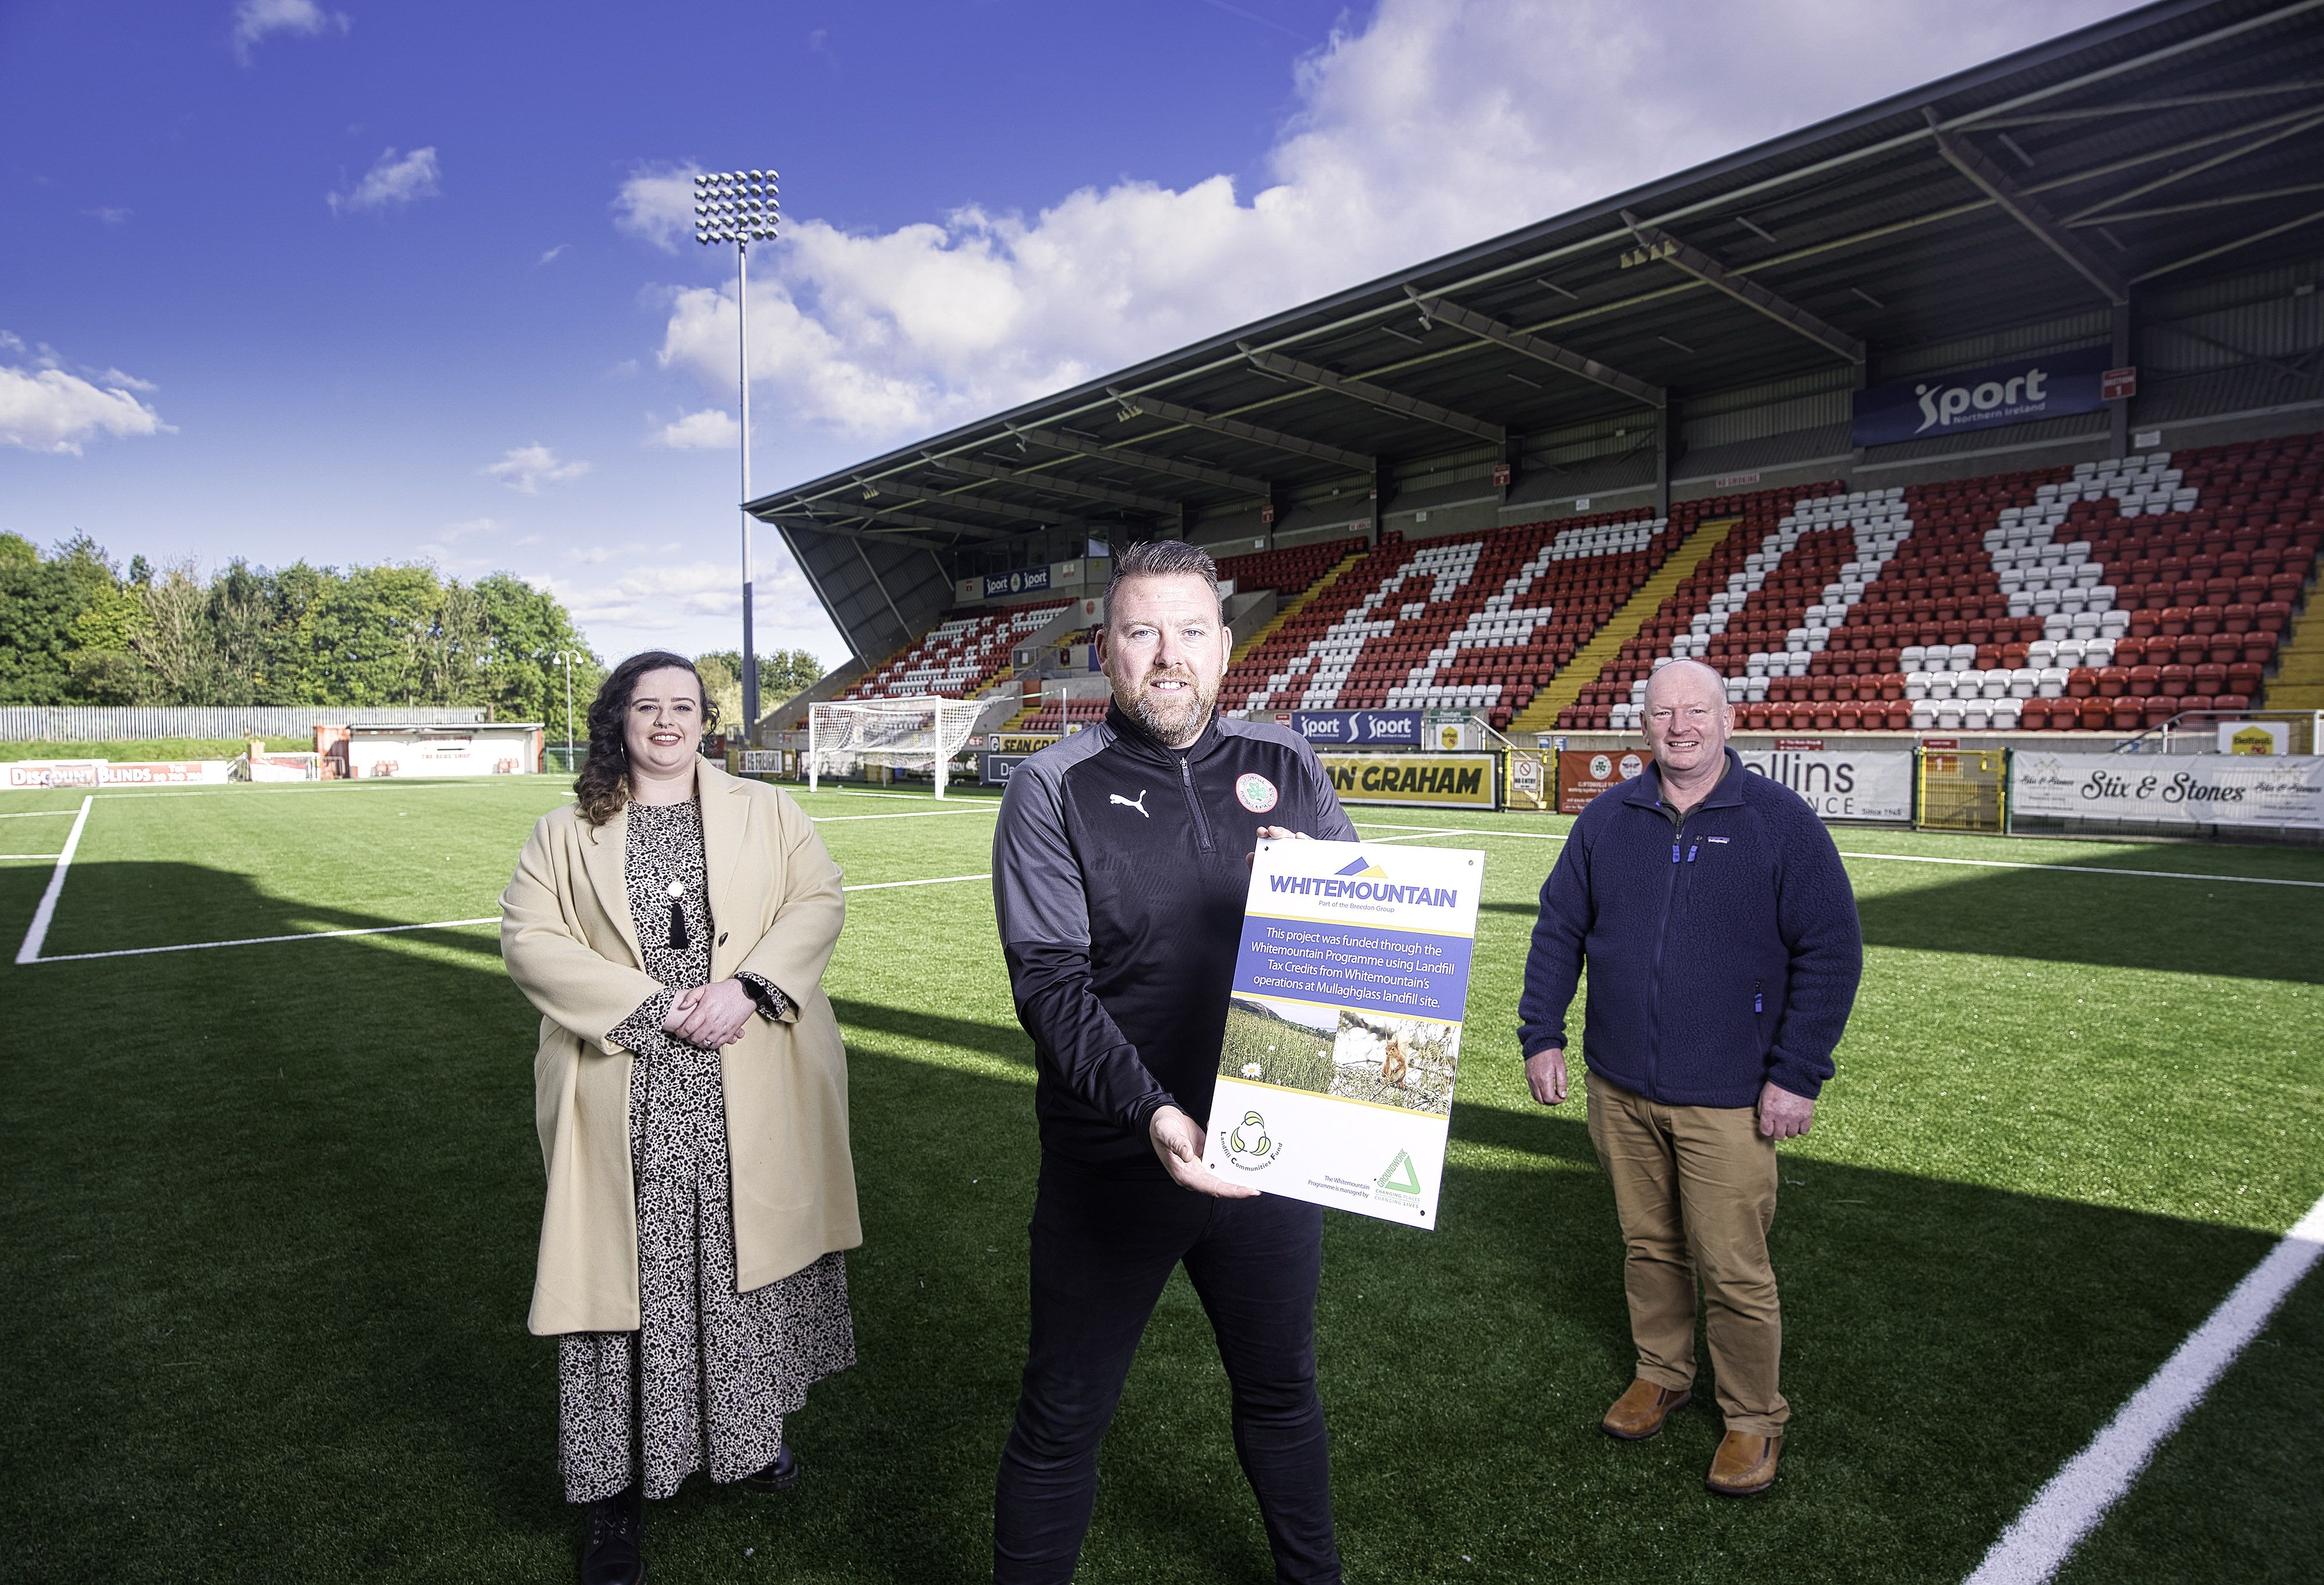 FUNDING: Shannon Downey (Communities Lead at Groundwork NI), Declan O\'Hara (Cliftonville FC) and Russell Drew (Whitemountain Programme)